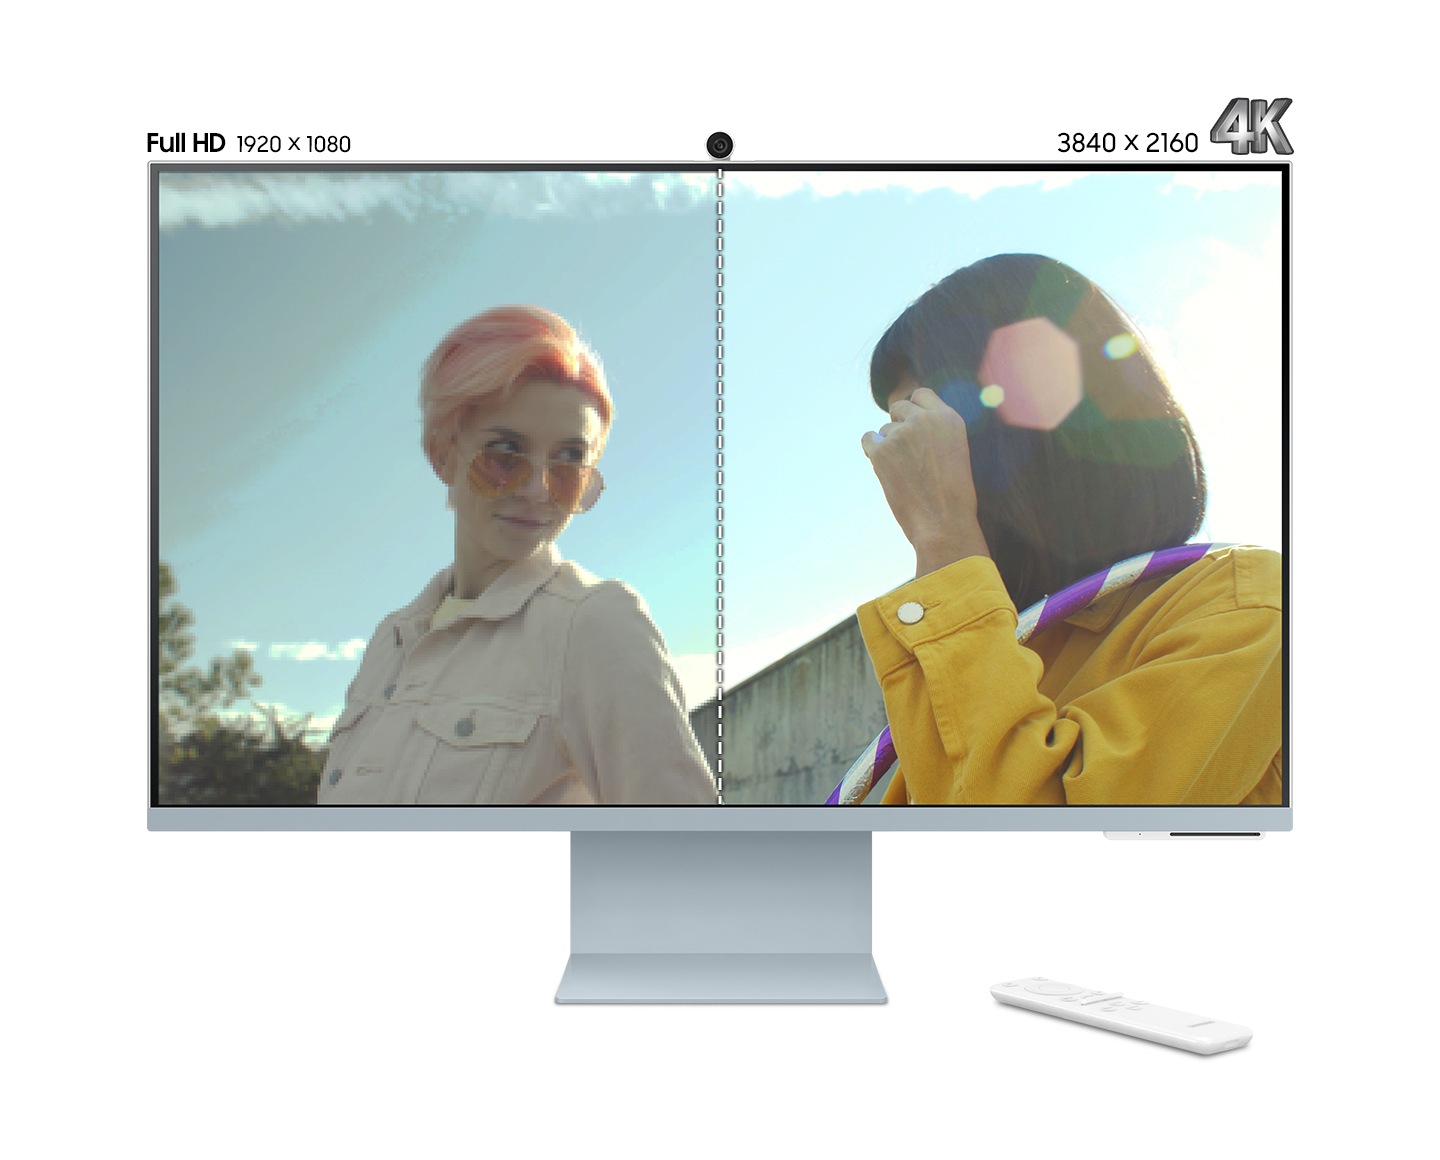 The screen, featuring with two women, is divided into half to compare the picture quality. On the left side of the screen is Full HD, 1920 x 1080 and on the right side of it is 4K, 3840 x 2160. At the end, the 4K screen fills up the whole screen and its picture quality shows clearer than Full HD.